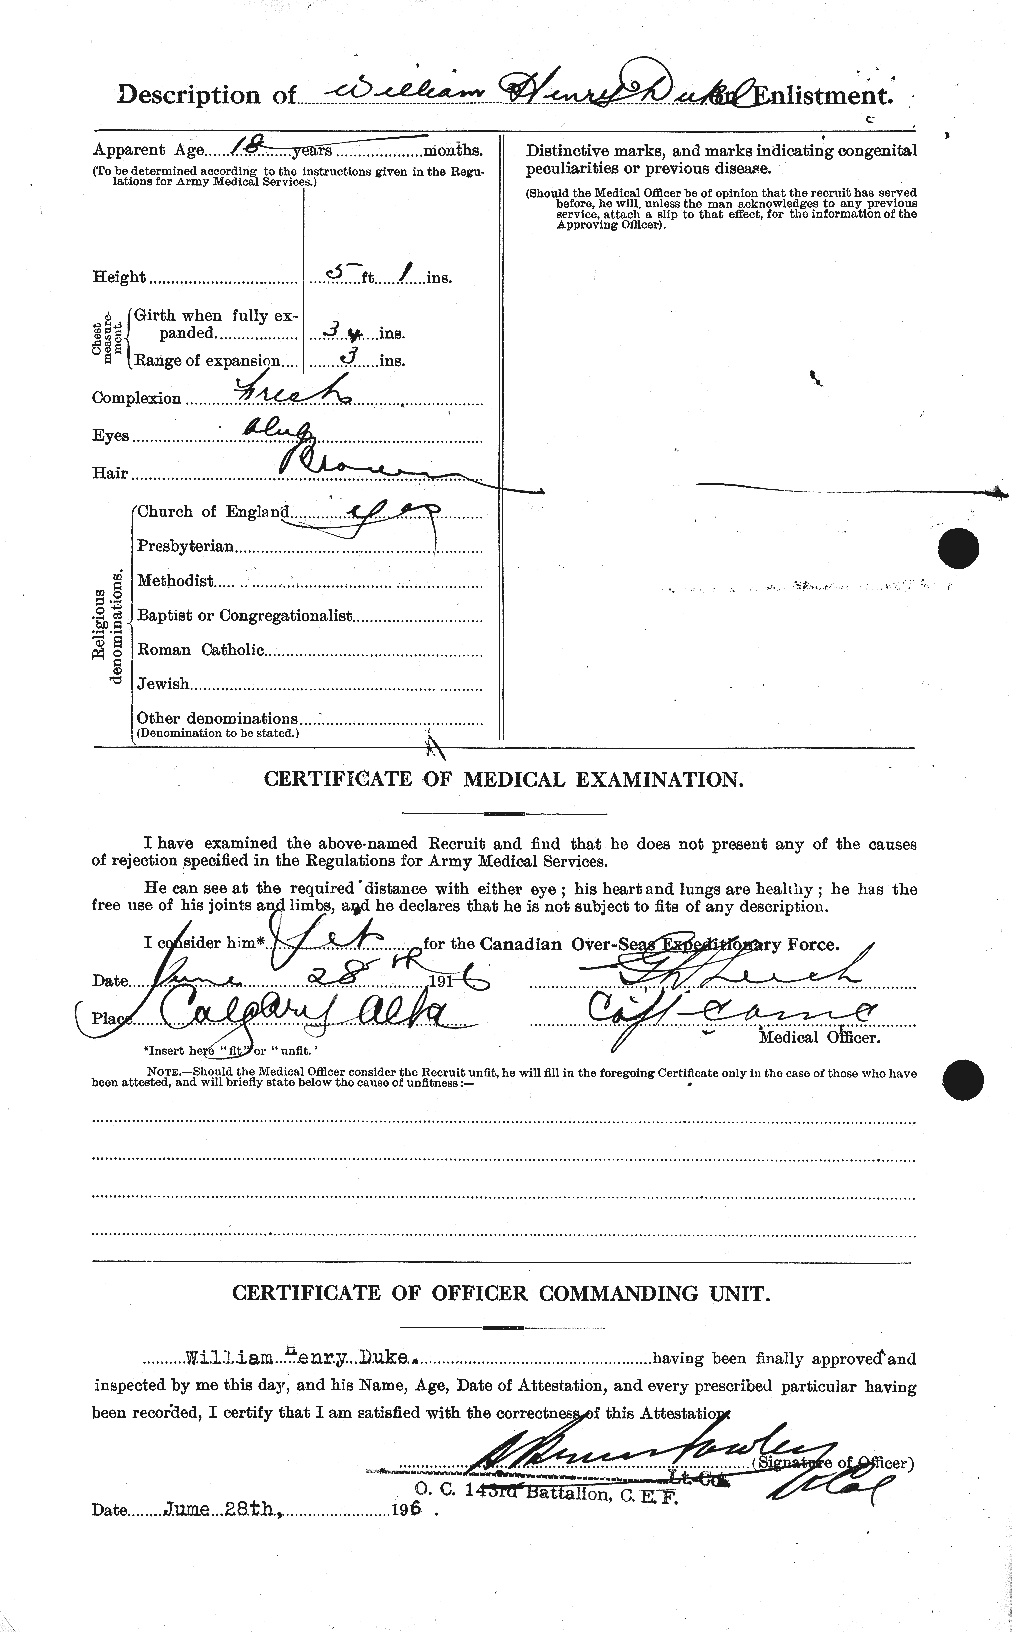 Personnel Records of the First World War - CEF 302065b